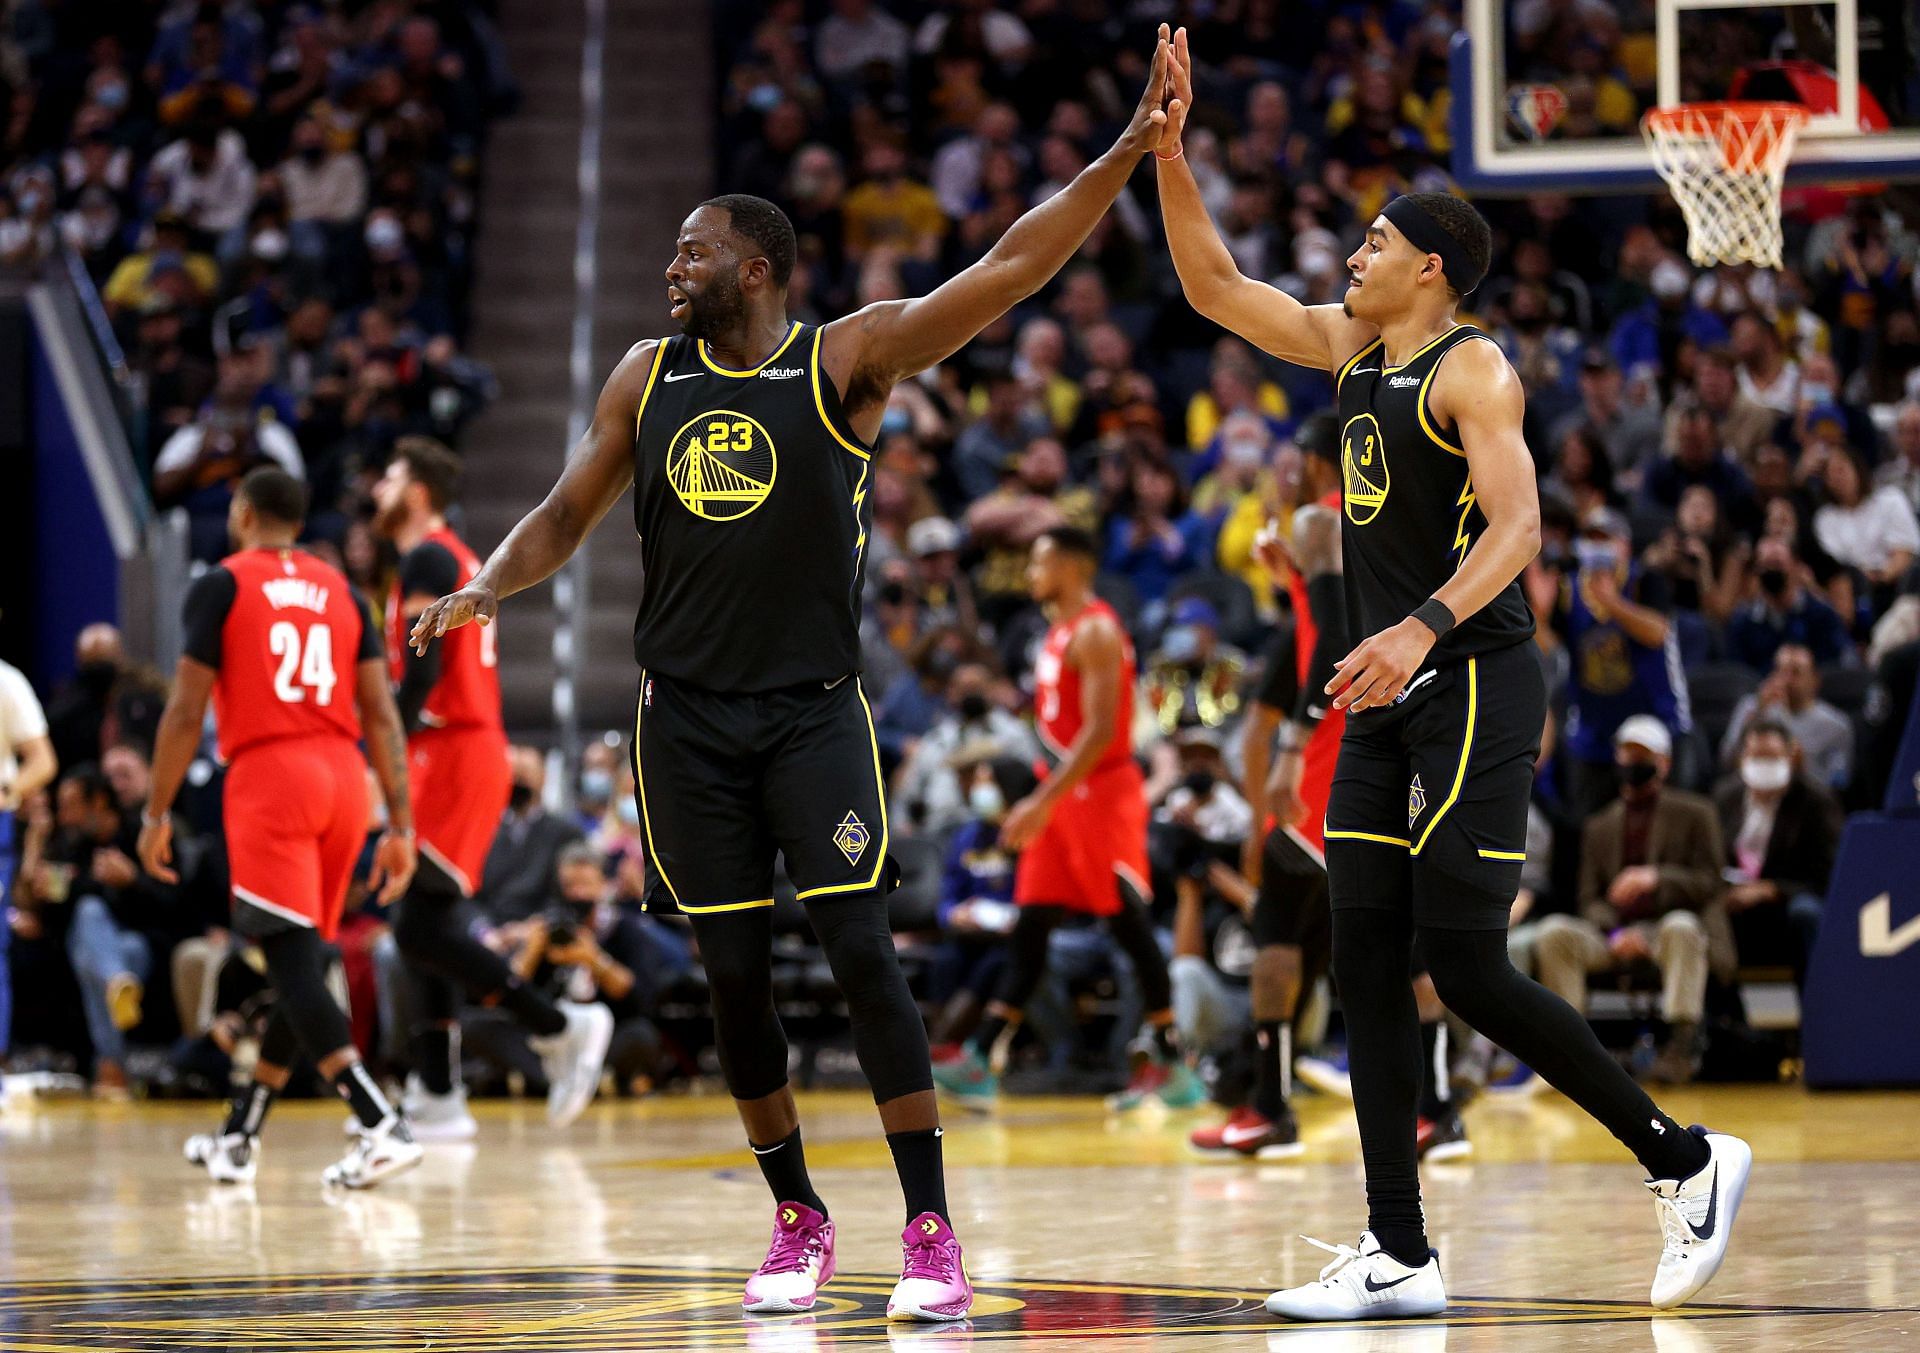 Current Golden State Warriors teammates Draymond Green and Jordan Poole came from college rivals.